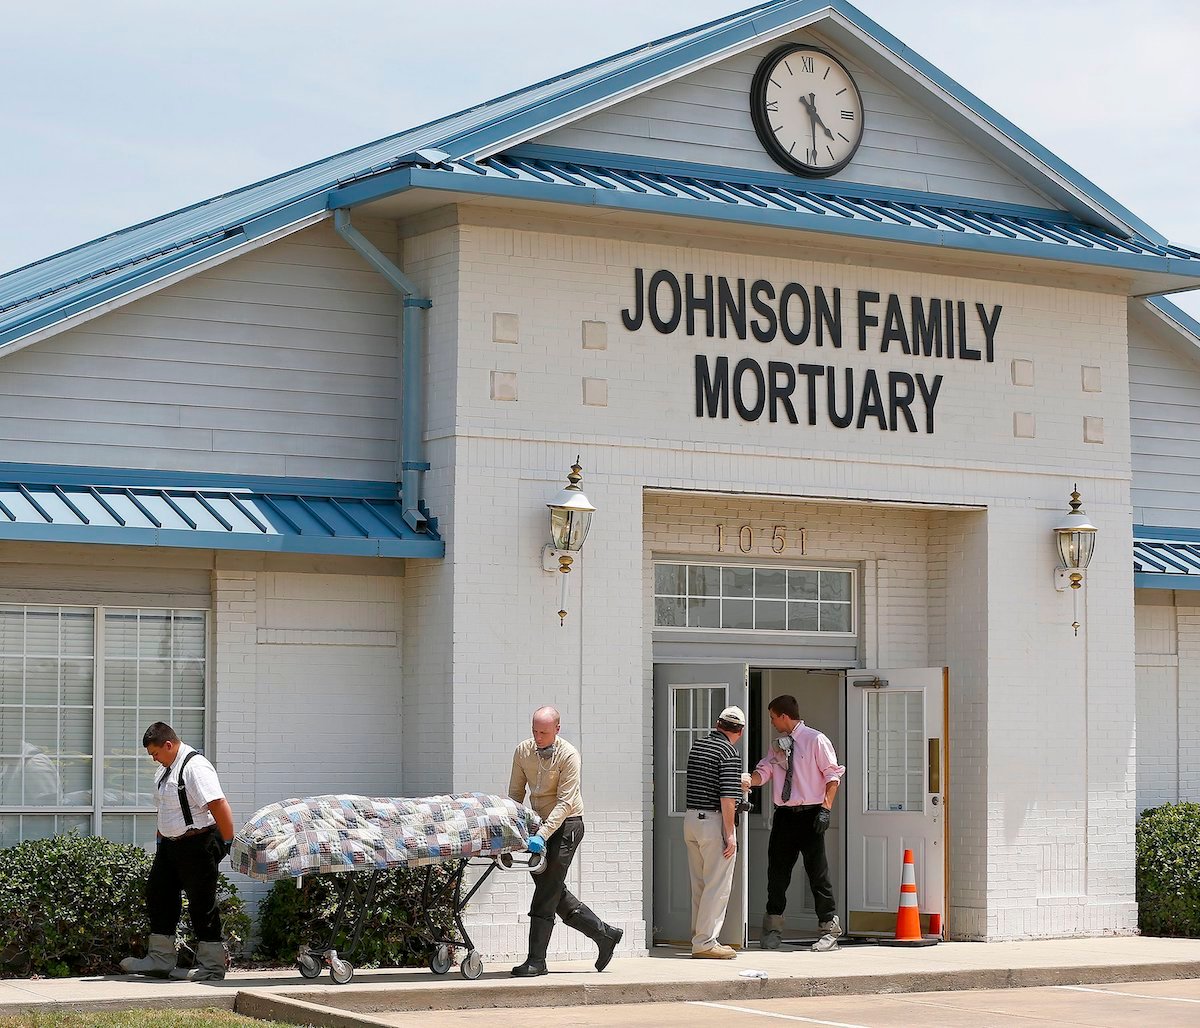 Exterior of the Johnson Family Morturary as people wheel away a covered body on a stretcher